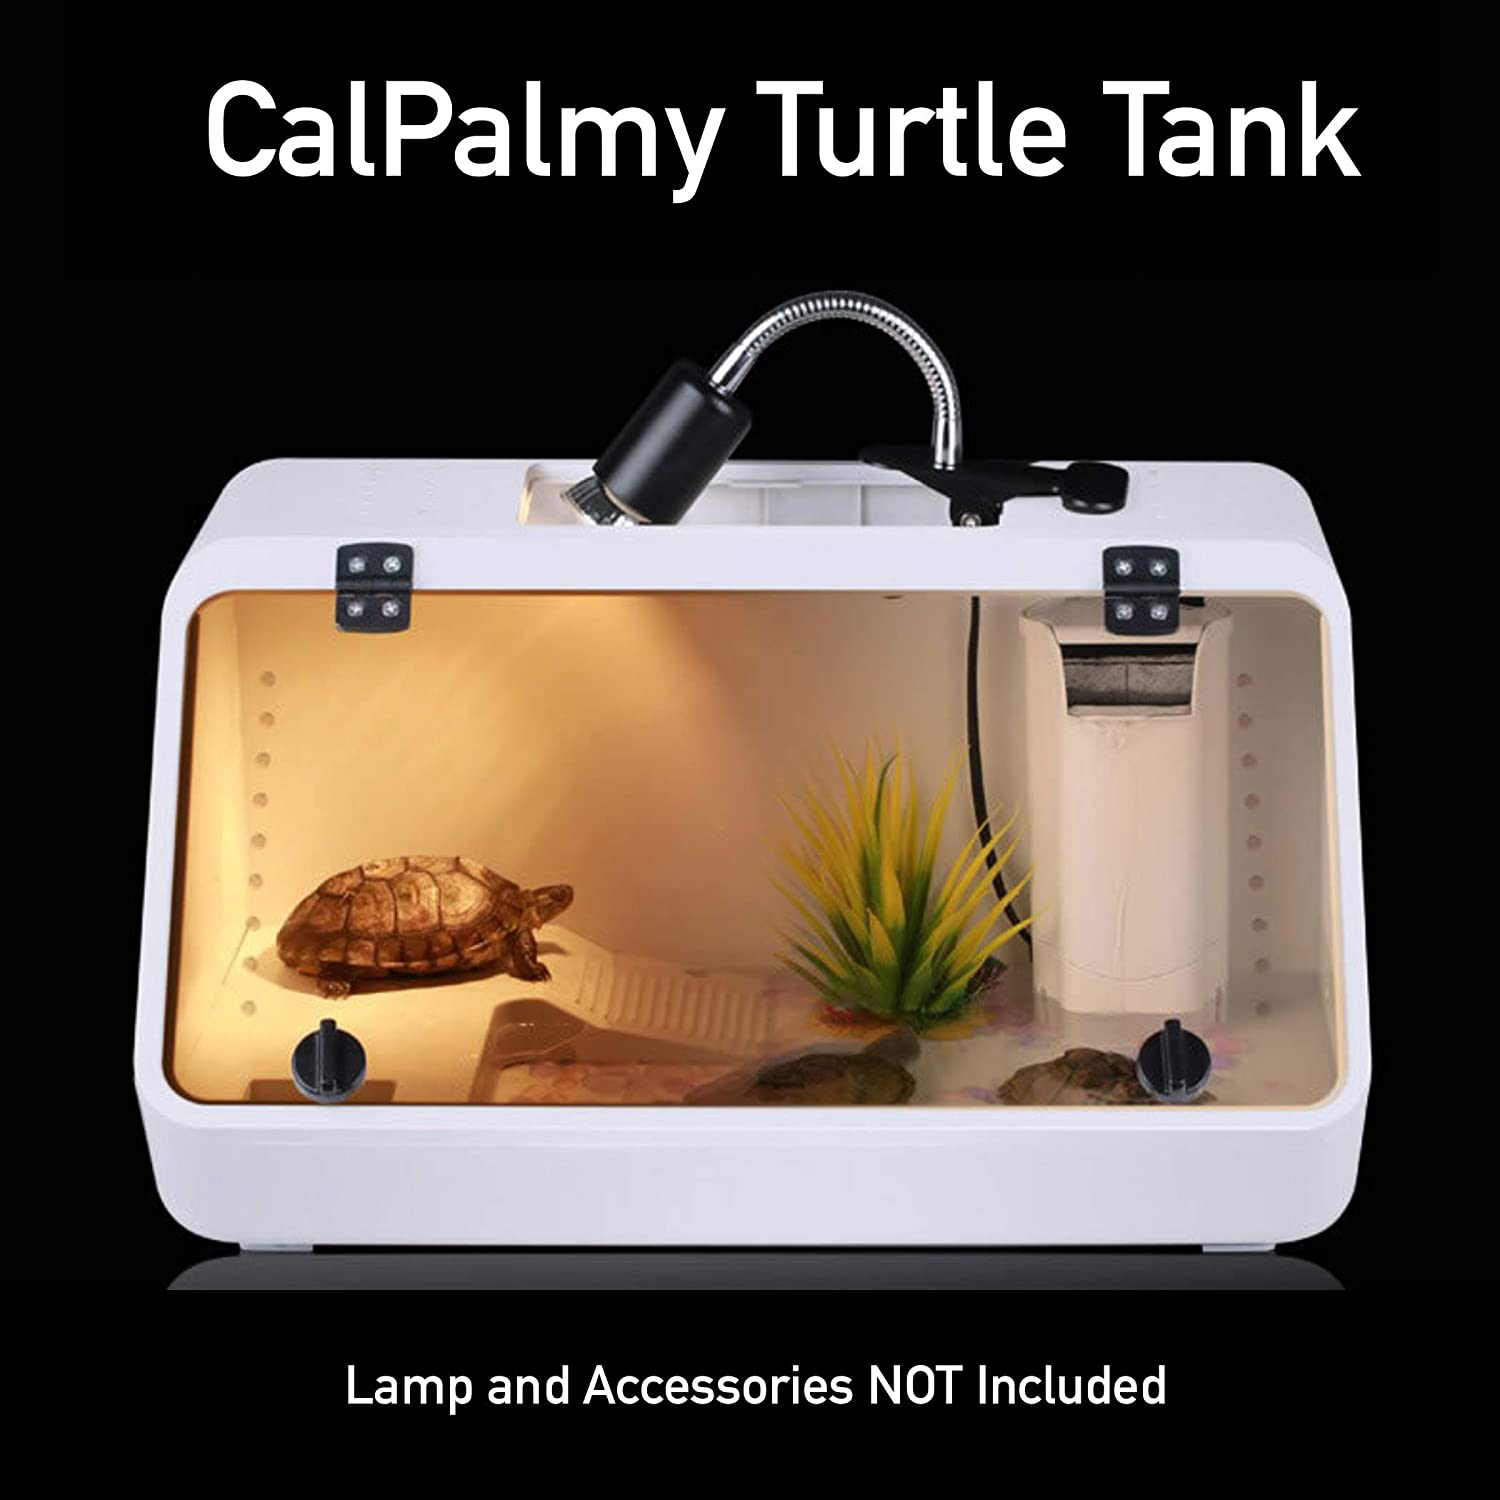 Large Reptile Tank – an Aquarium with a See-Through, Easy Access Front Panel Door | Habitat for Small Reptiles like Young Bearded Dragons, Lizards, Small Snakes and More |19''X10''X10'' with Food Tray Animals & Pet Supplies > Pet Supplies > Reptile & Amphibian Supplies > Reptile & Amphibian Habitats CALPALMY   